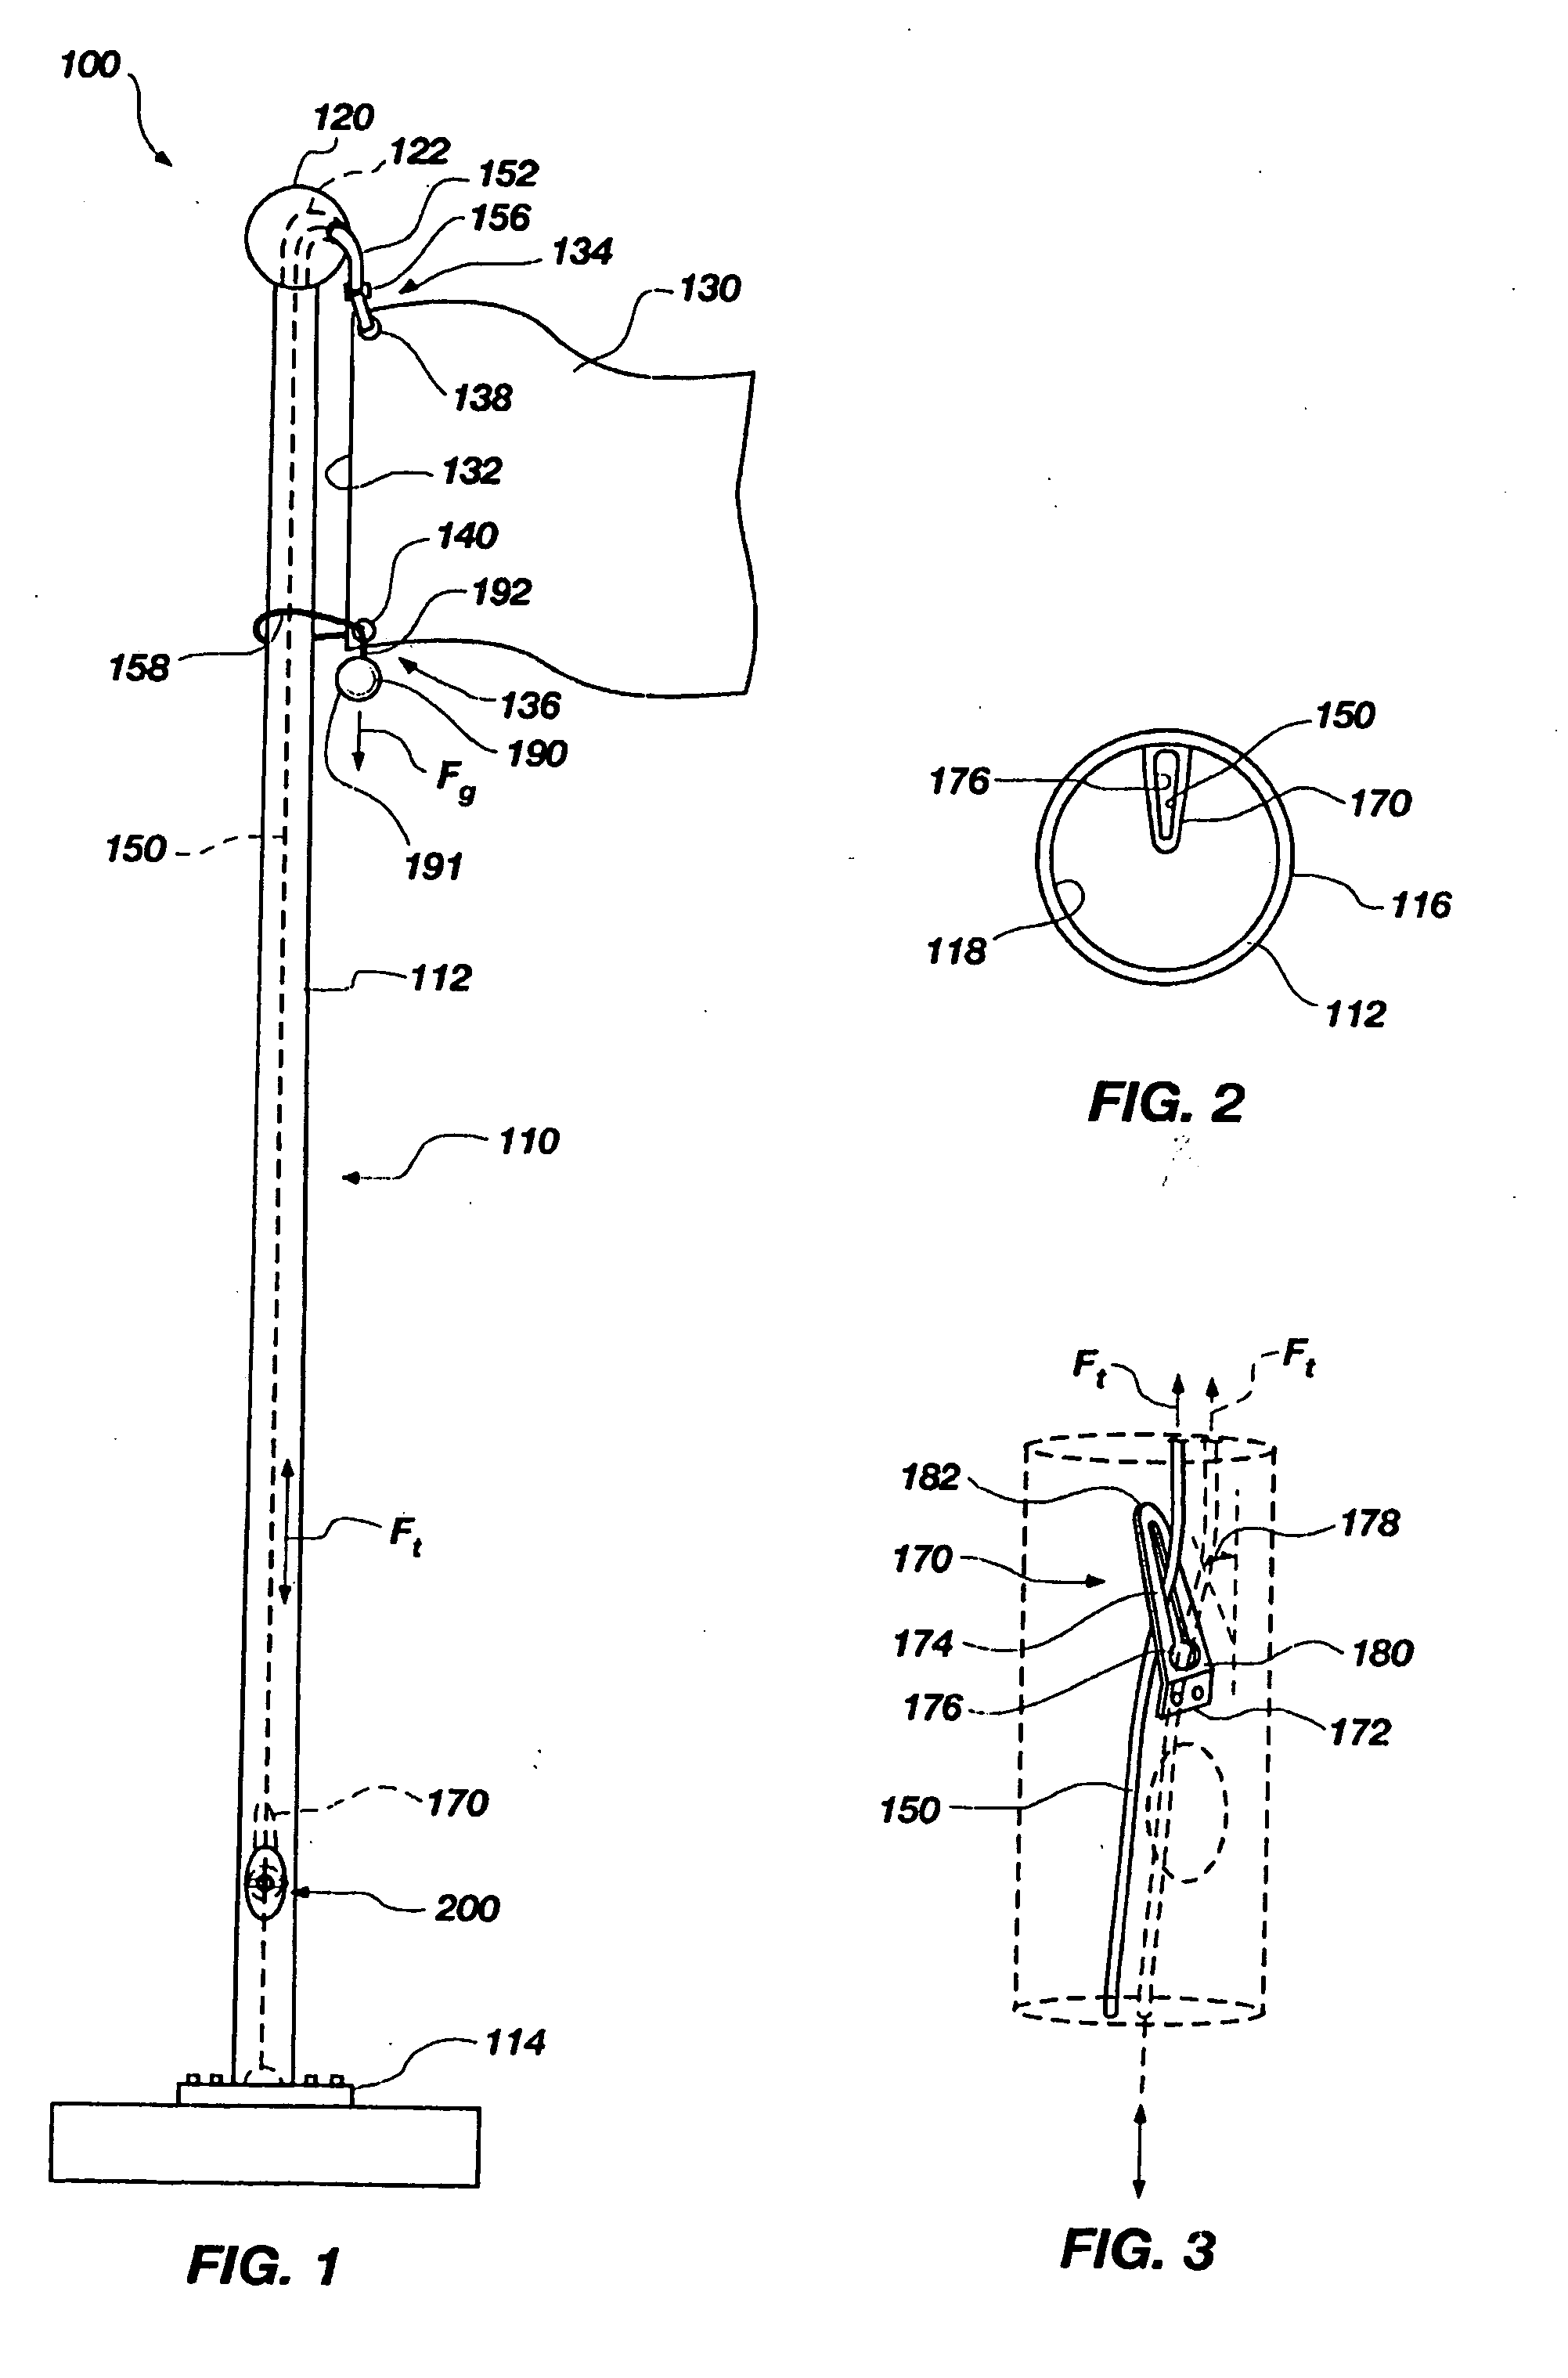 Halyard system for a flag pole